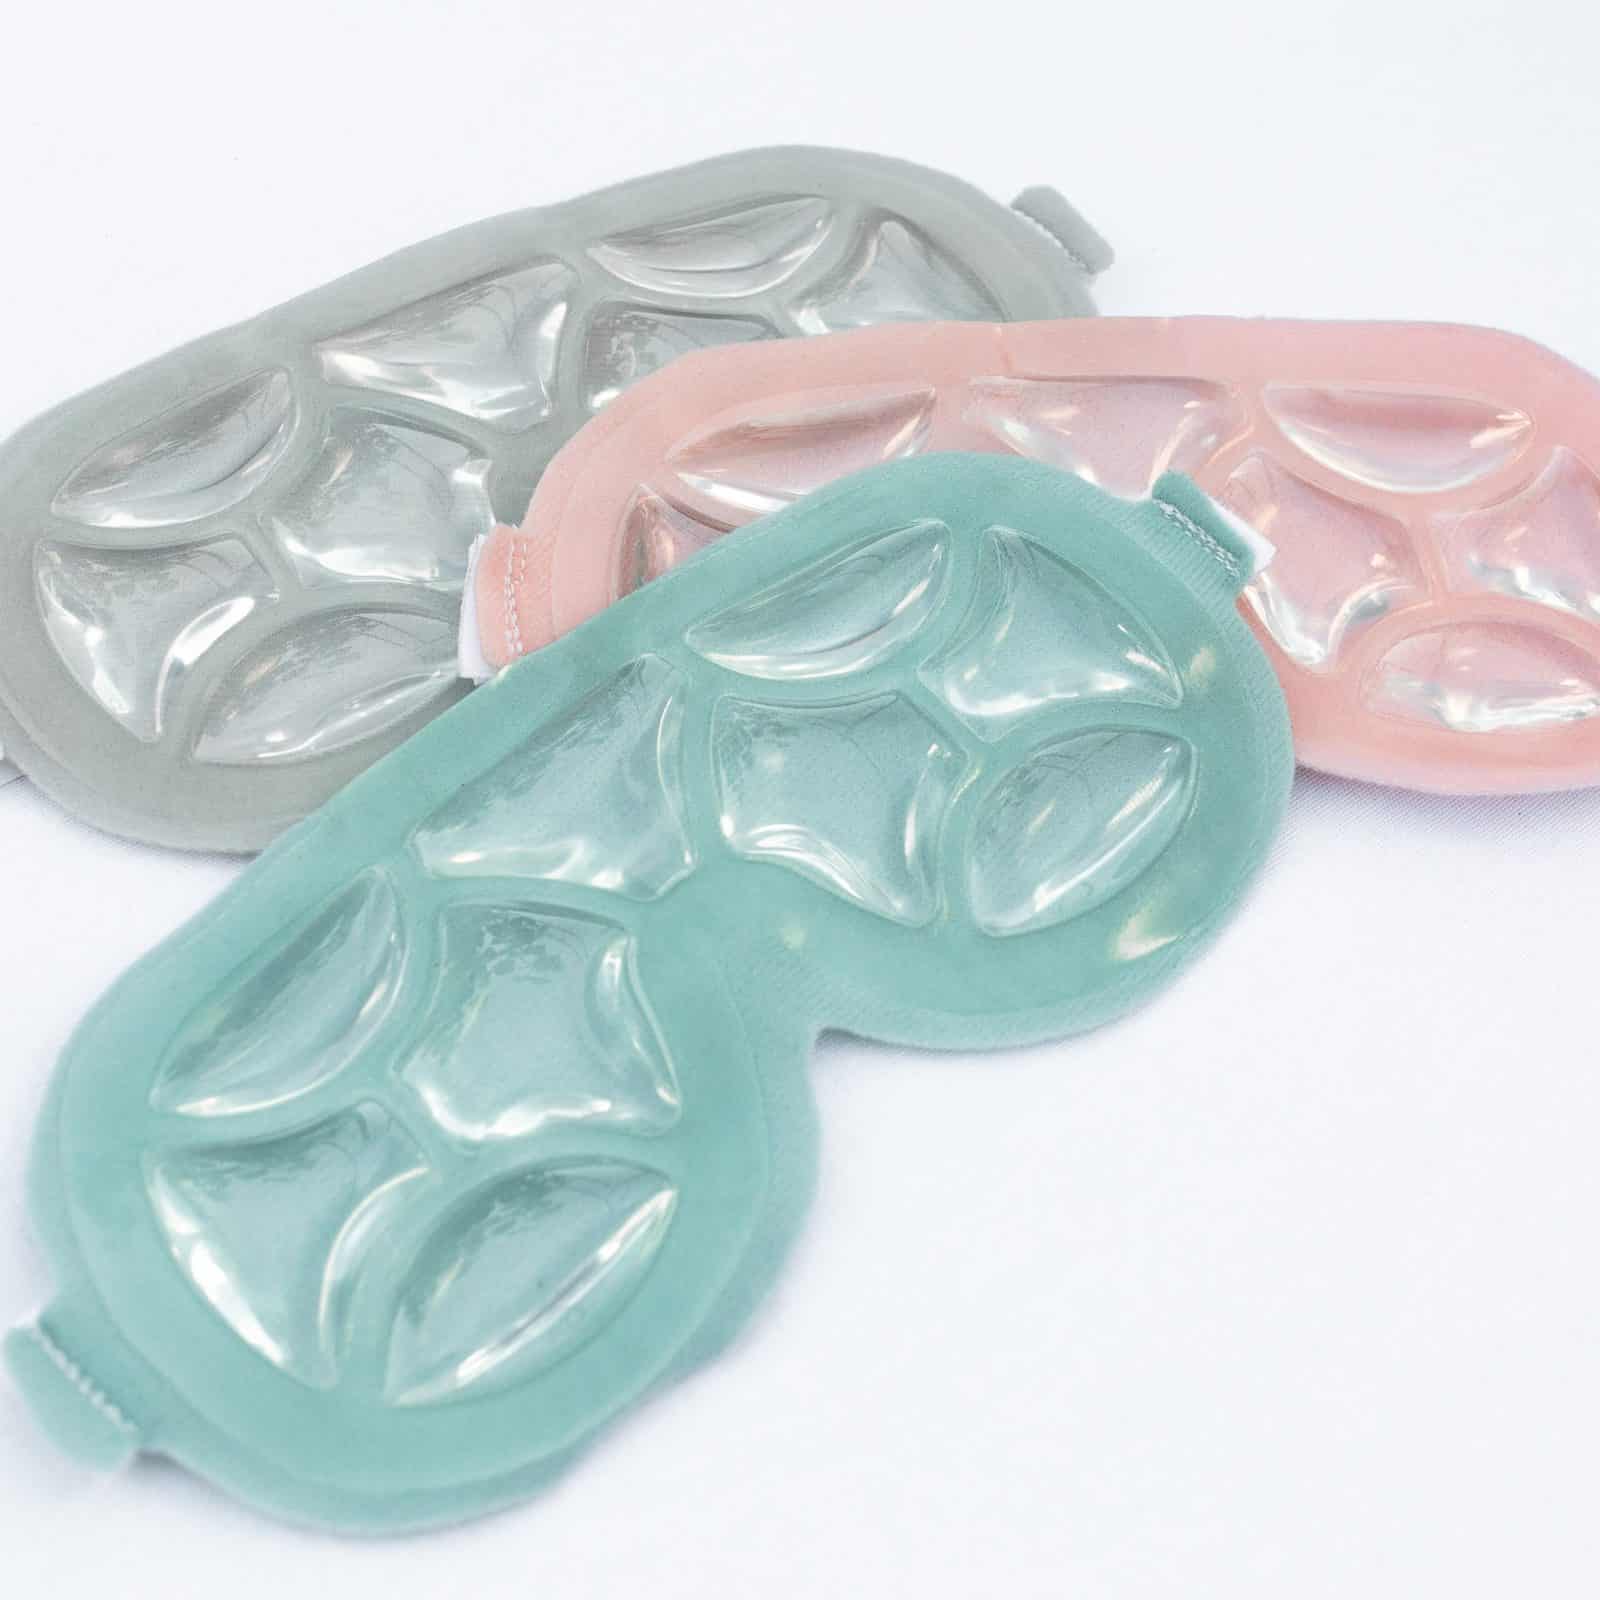 Featured image for “Cool Eye Mask”